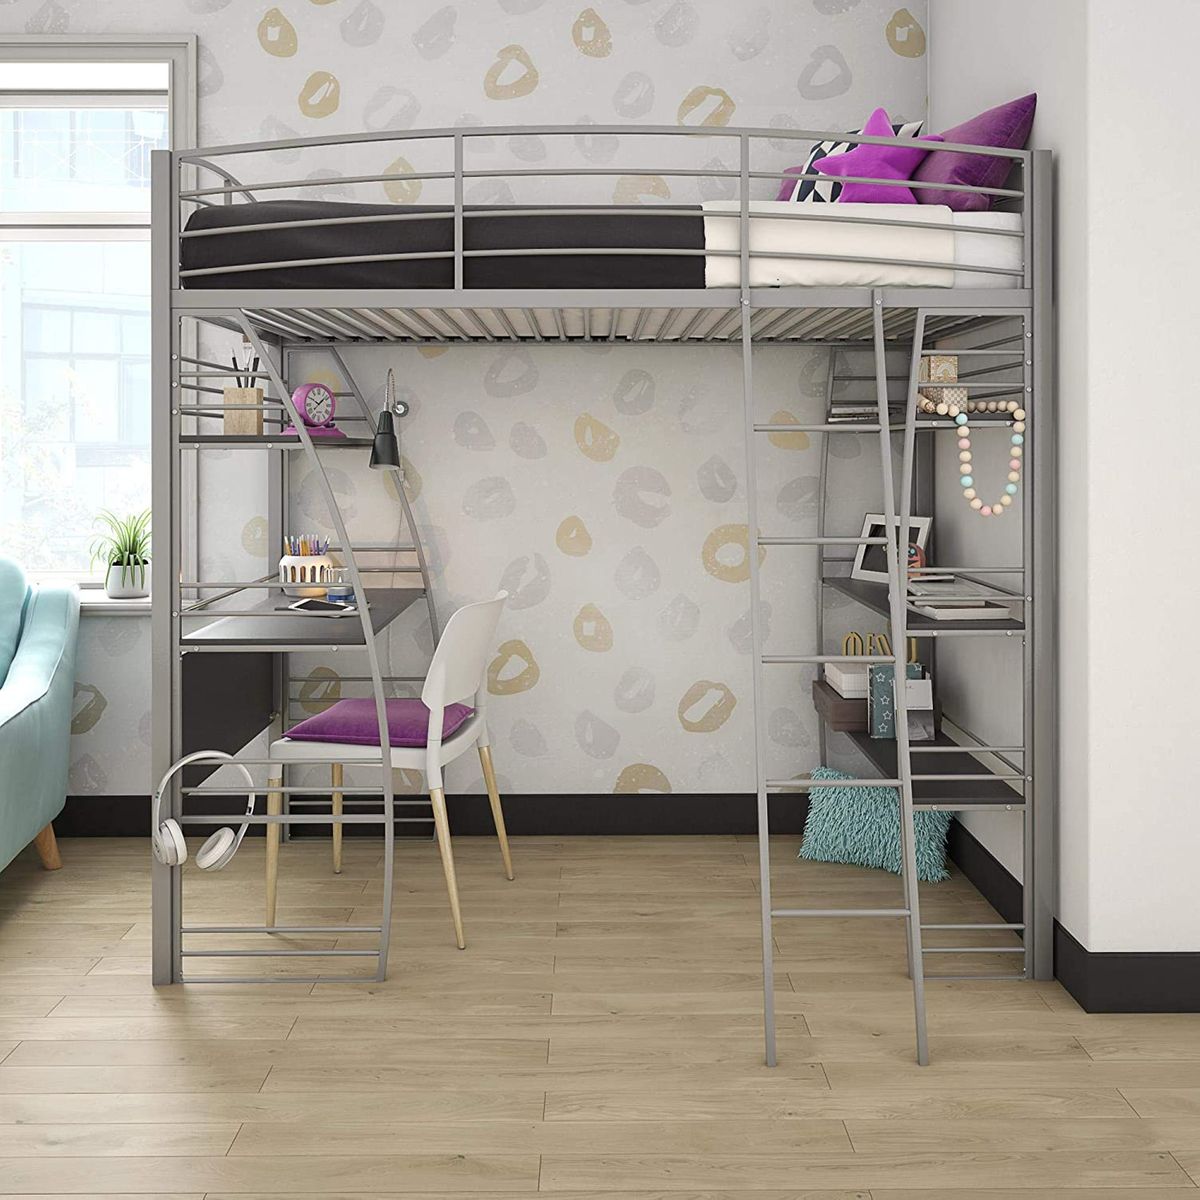 8 Best Bunk Beds 2020 The Strategist, Bunk Bed With Only Top Bunk